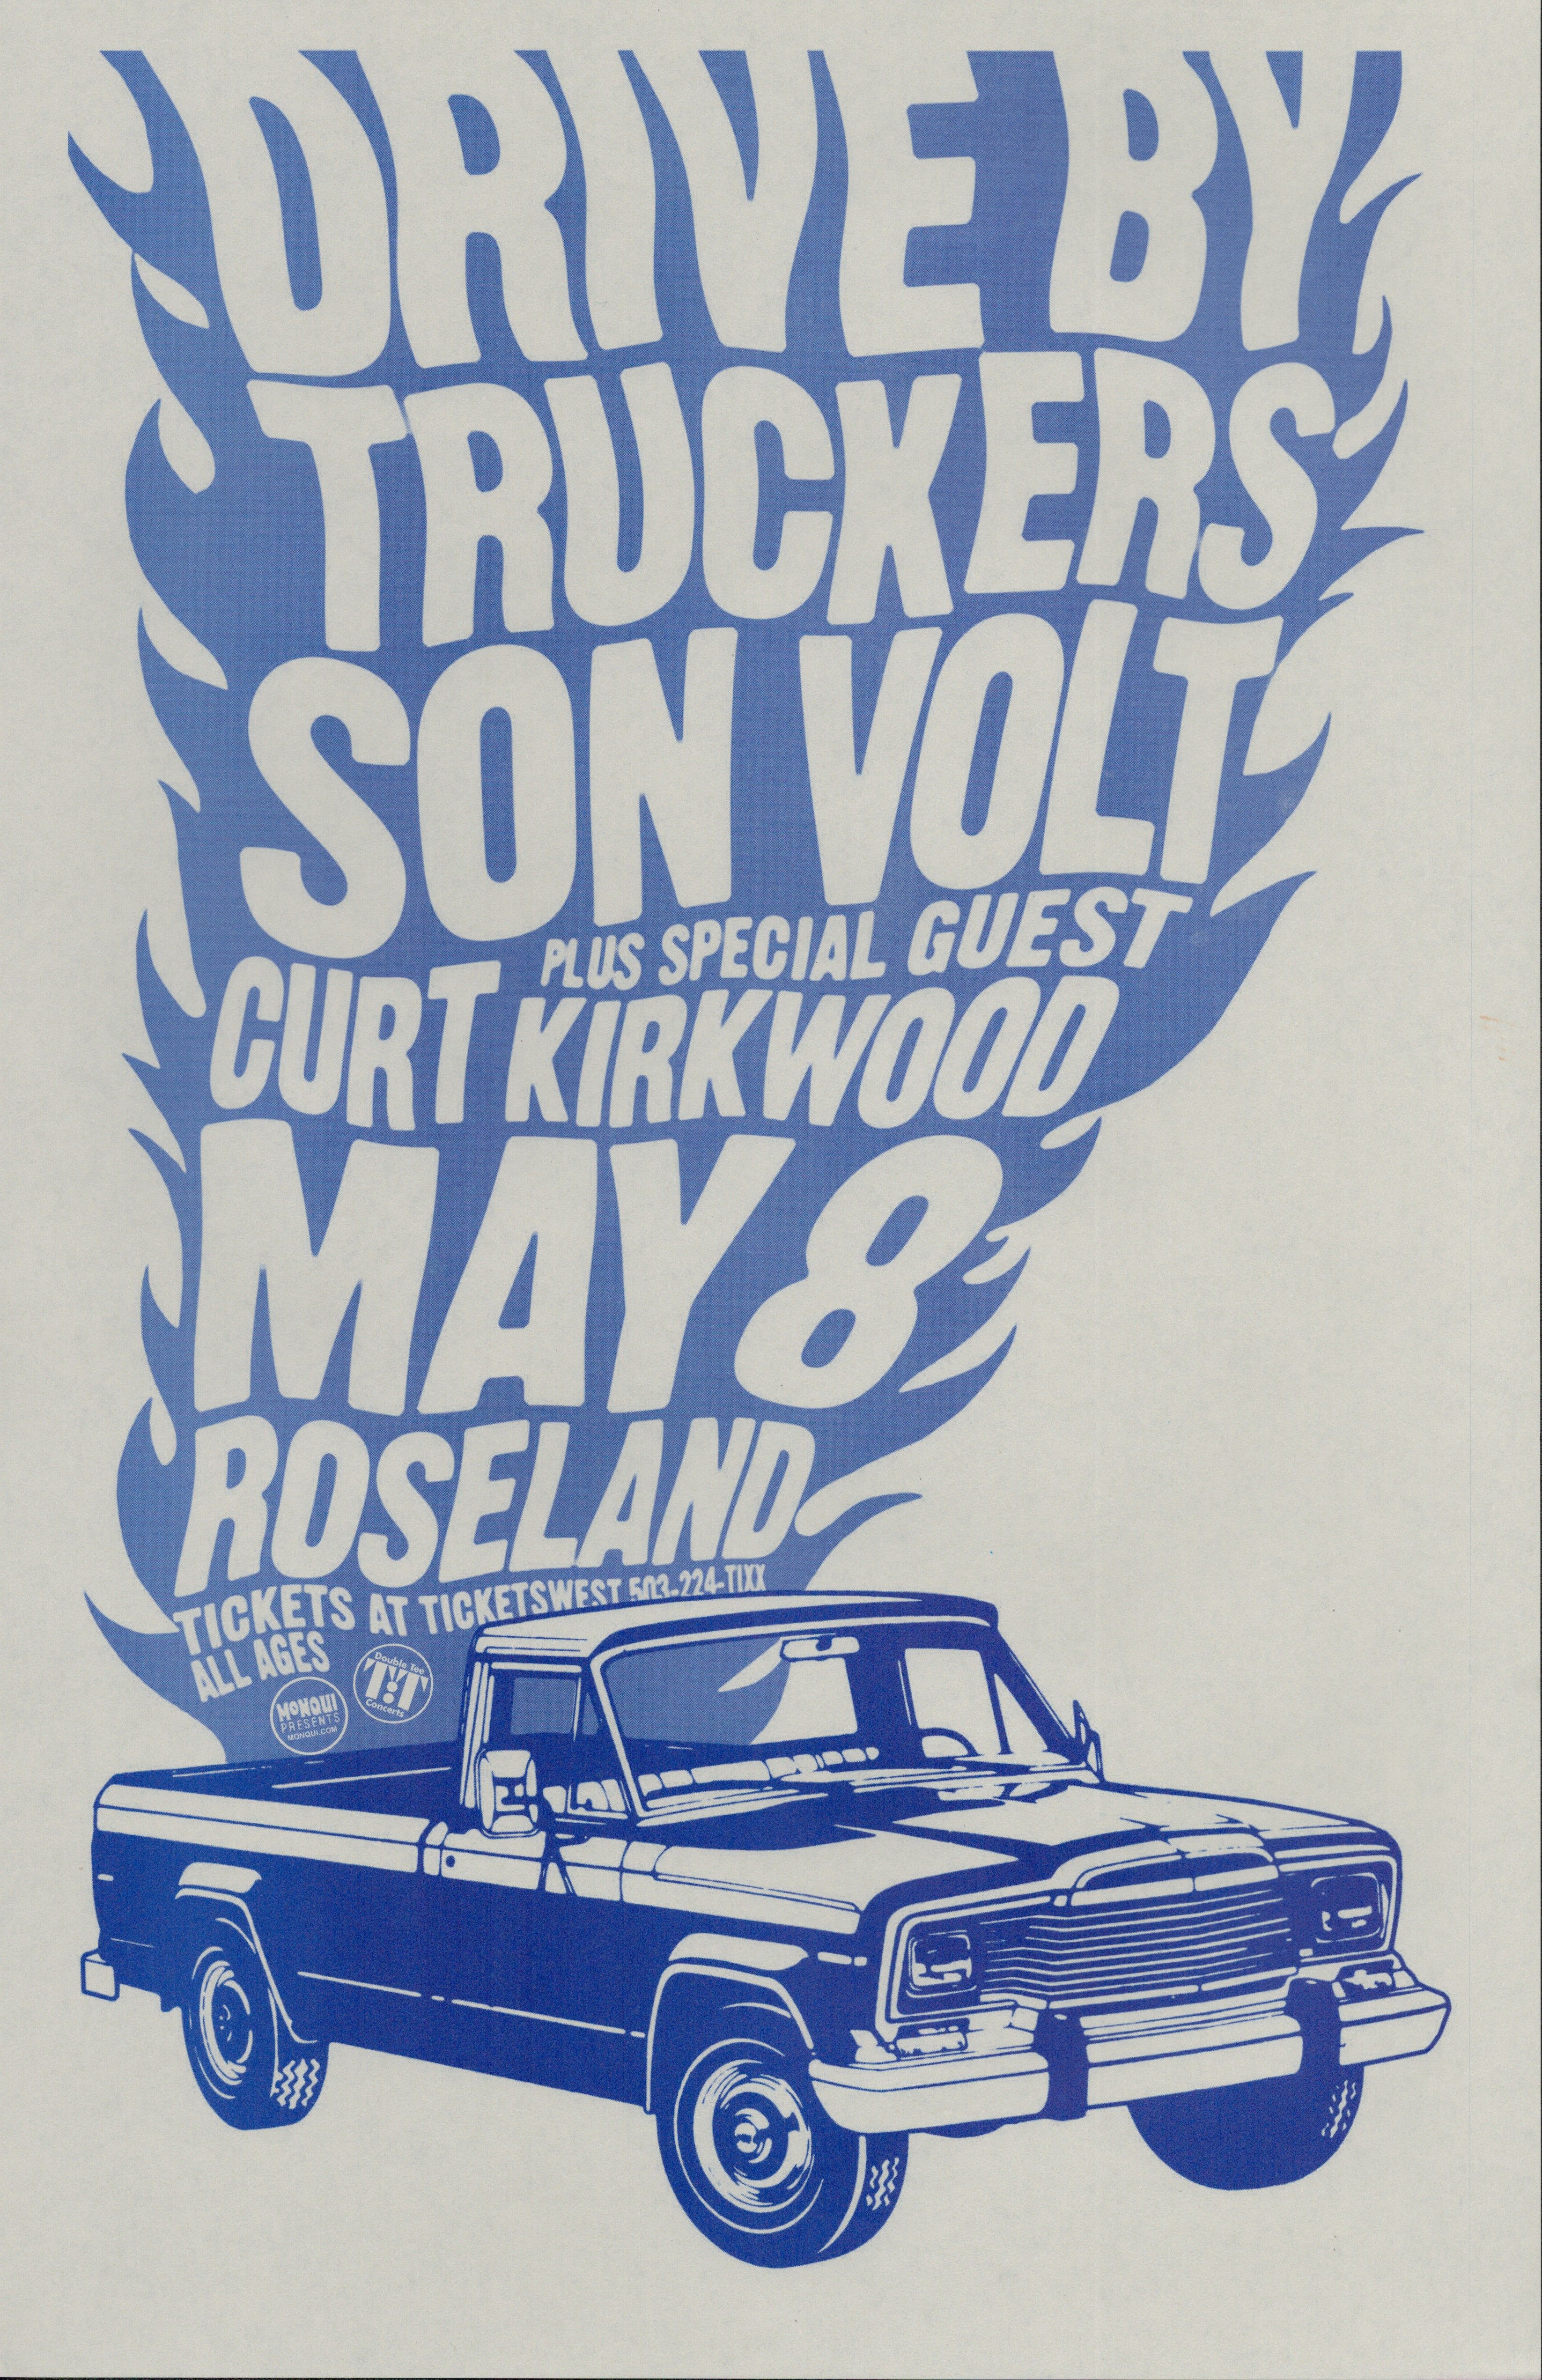 MXP-72.4 Drive By Truckers Roseland Theater 2006 Concert Poster